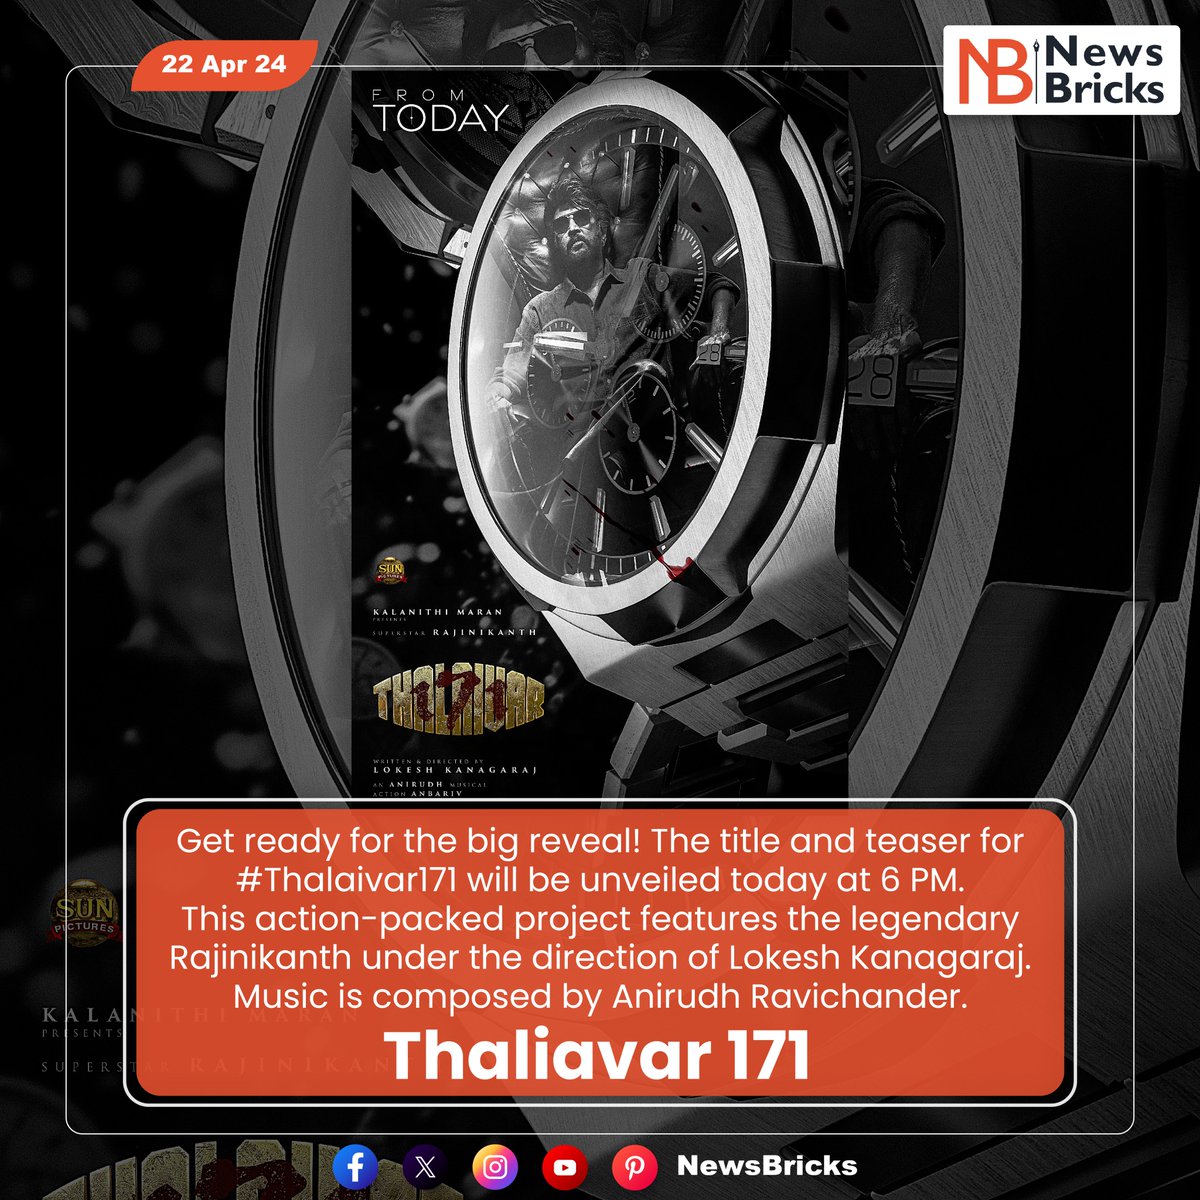 Get ready for the big reveal! The title and teaser for #Thalaivar171 will be unveiled today at 6 PM.

#Thalaivar171TitleReveal #Thalaivar171Teaser #Rajinikanth #AnirudhRavichander #LokeshKanagaraj #MovieUpdates #CinemaUpdates #kollywood #IndianCinema